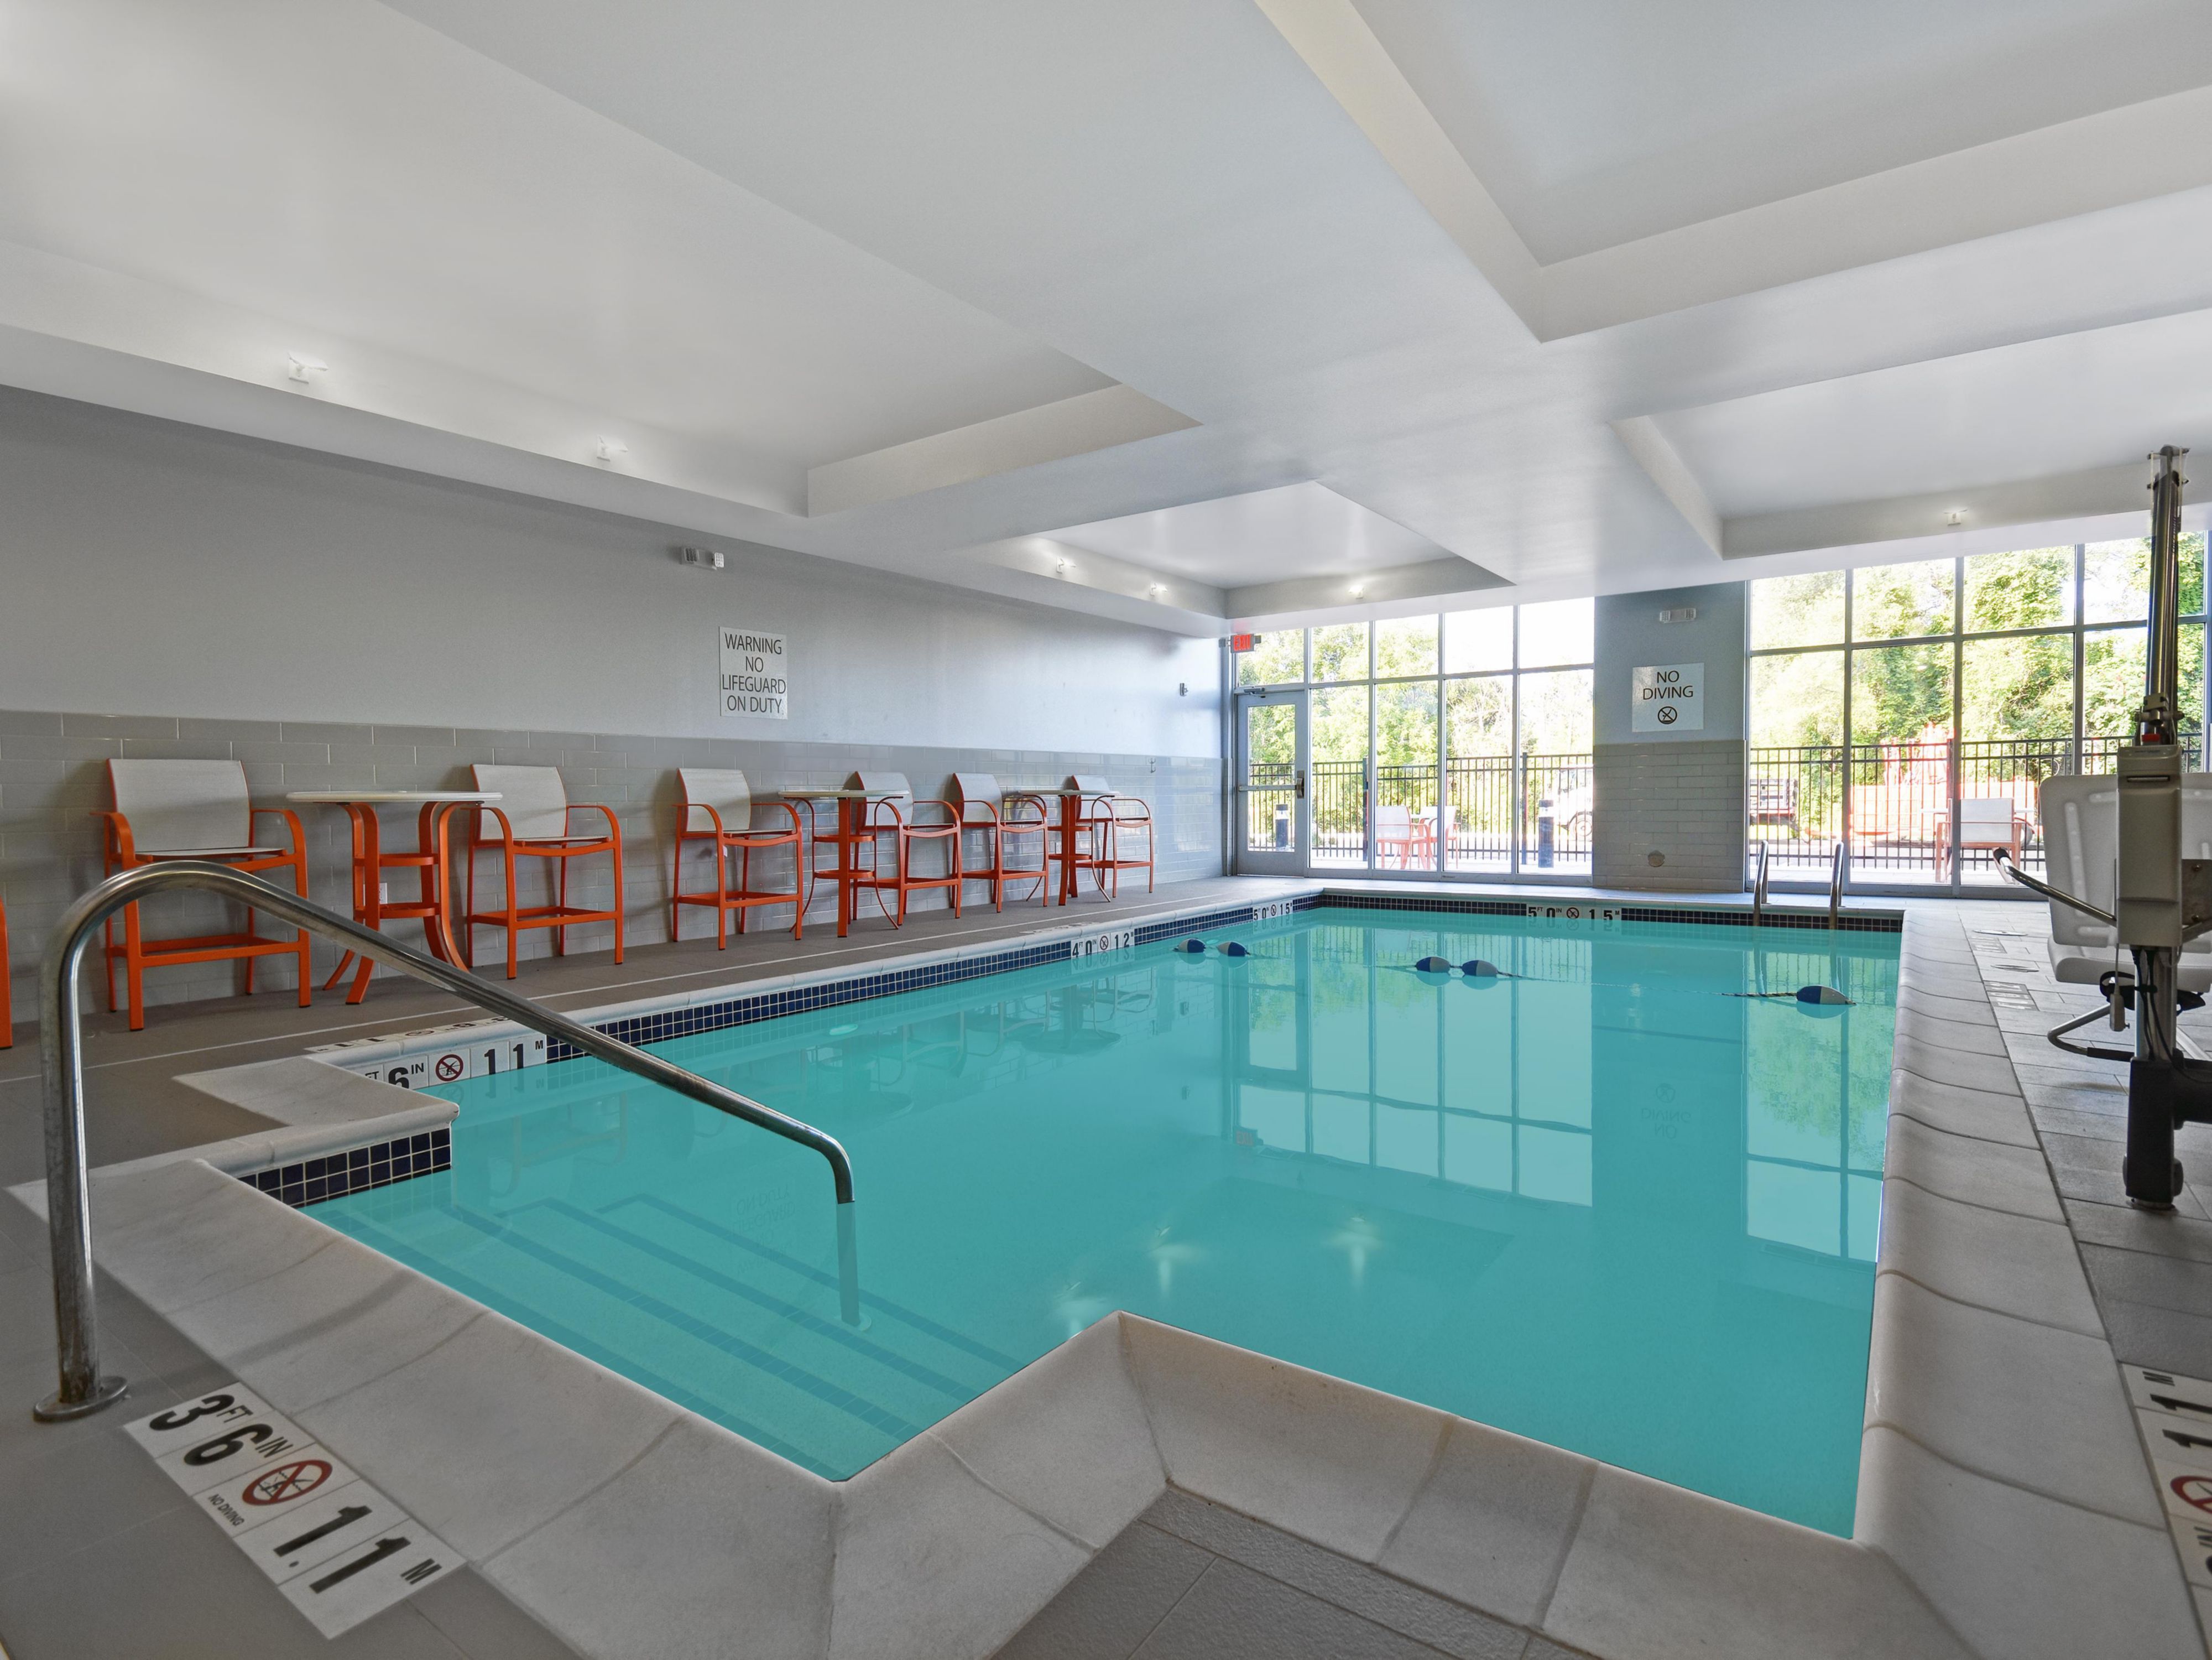 Enjoy our indoor heated pool after a long day at work!